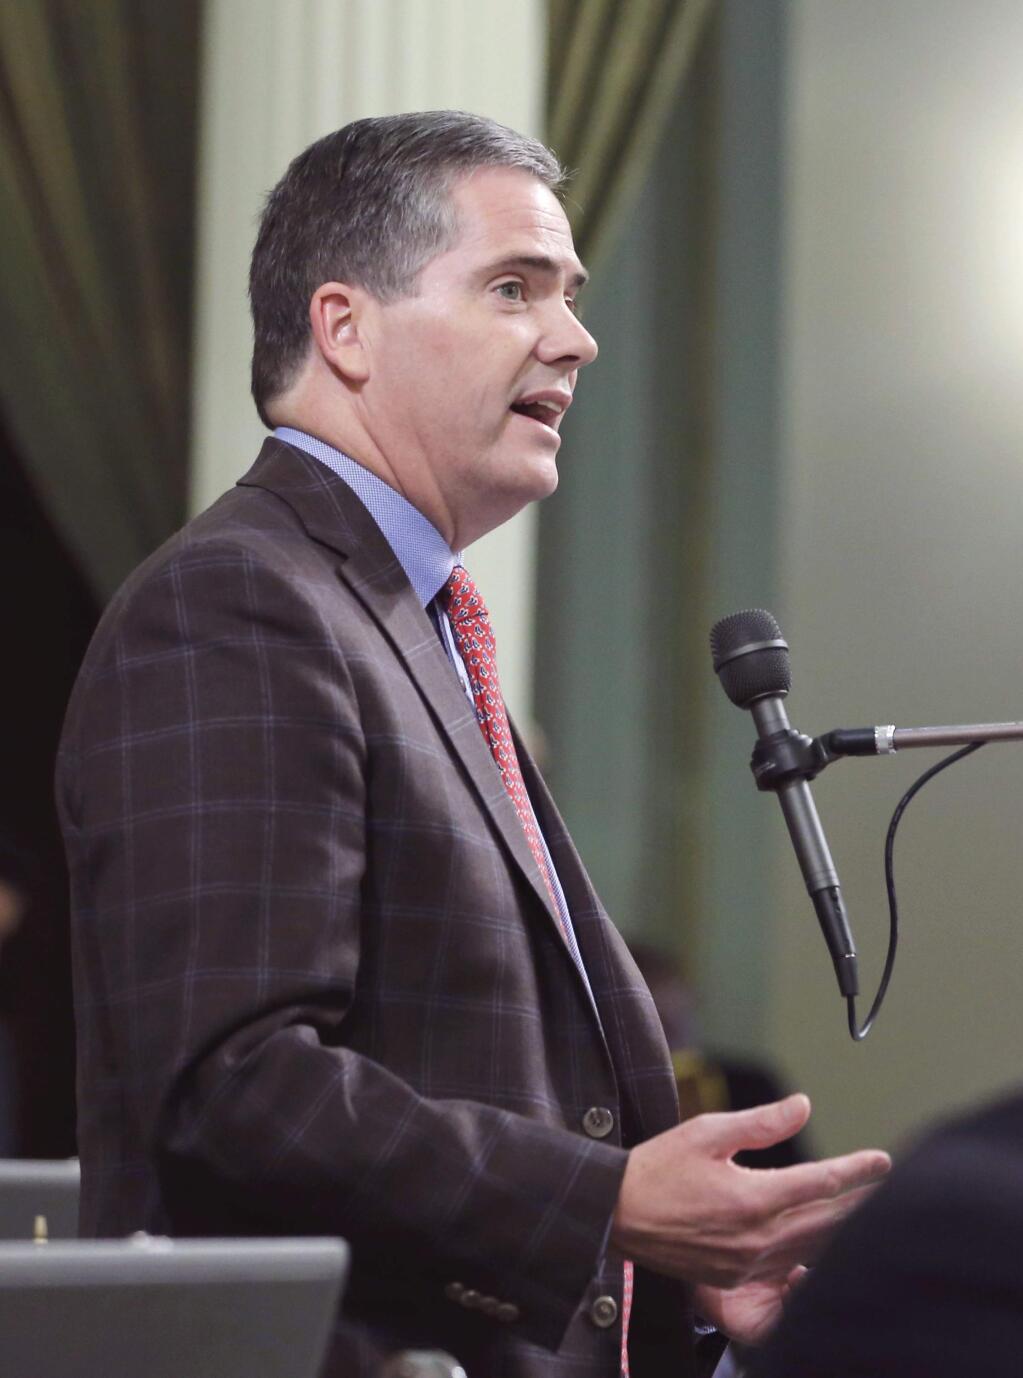 FILE - In this Aug, 15, 2016 file photo, Assemblyman David Hadley, R-Manhattan Beach, urges lawmakers in Sacramento, Calif., to approve a measure that would prevent California police from prematurely selling belongings seized from suspected criminals. (AP Photo/Rich Pedroncelli, File)